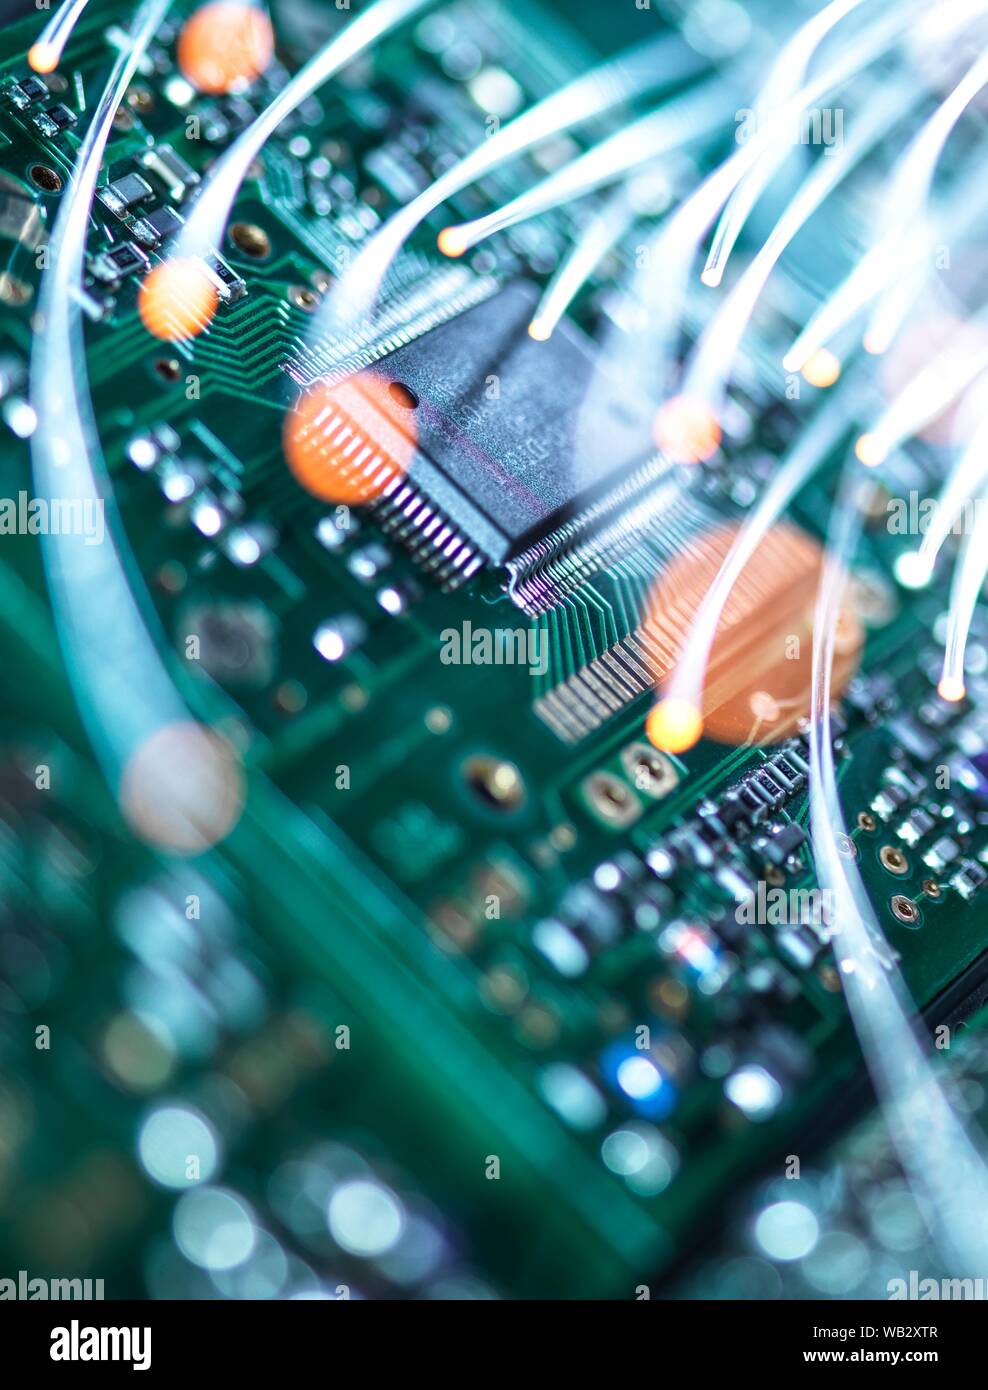 Digital communication, conceptual image. Fibre optics carrying data over electronic circuitry on a laptop computer. Stock Photo